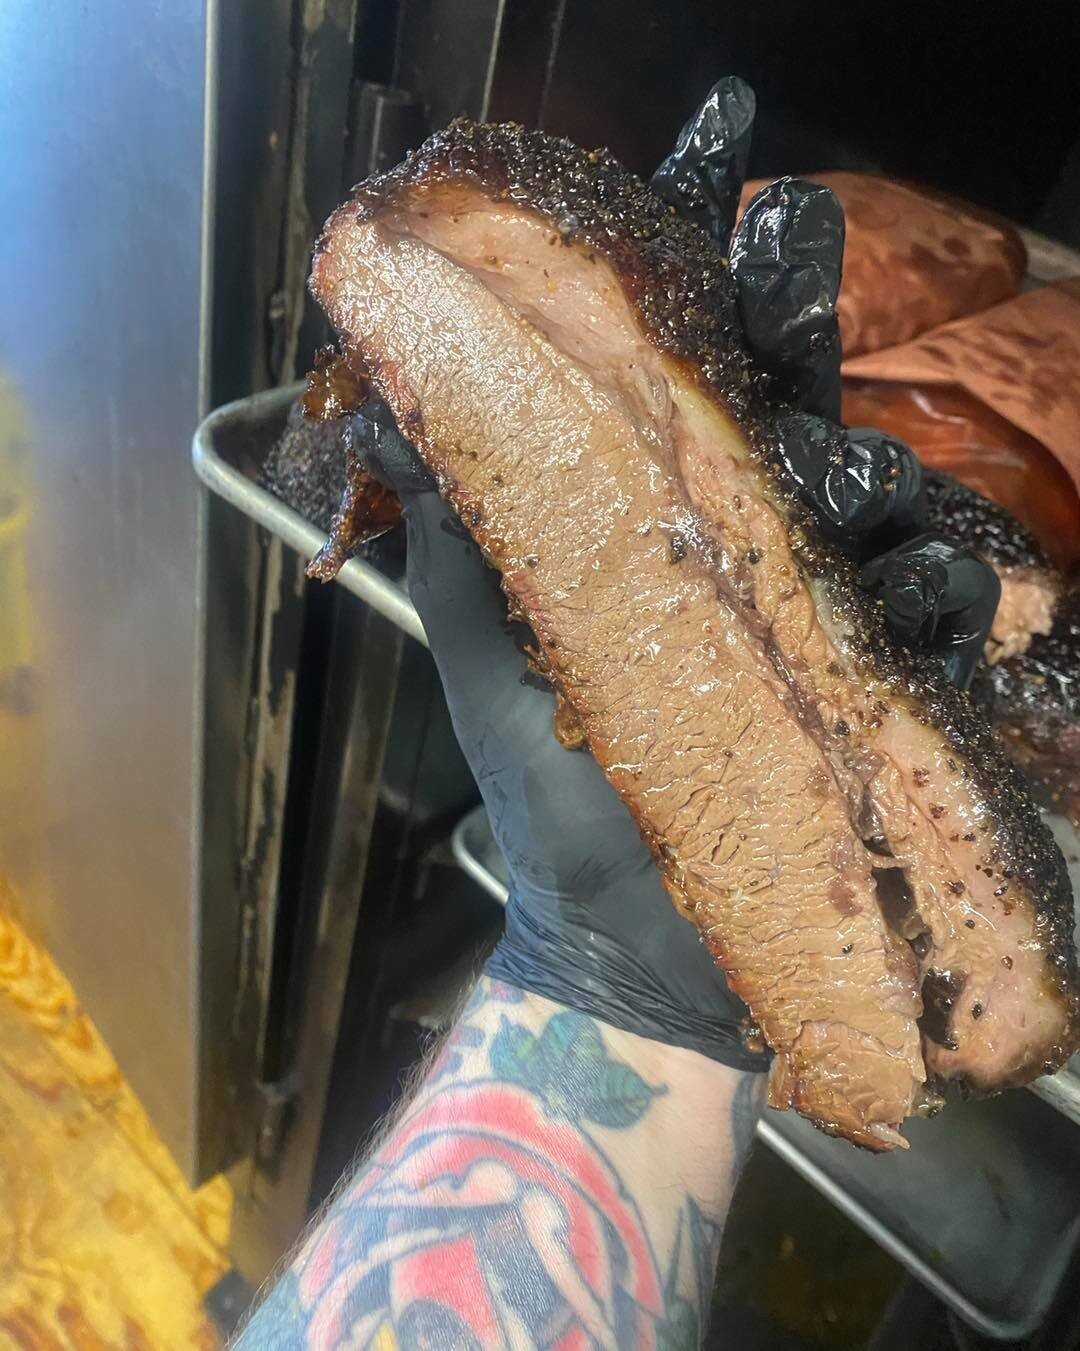 Monday is a wonderful day for brisket.